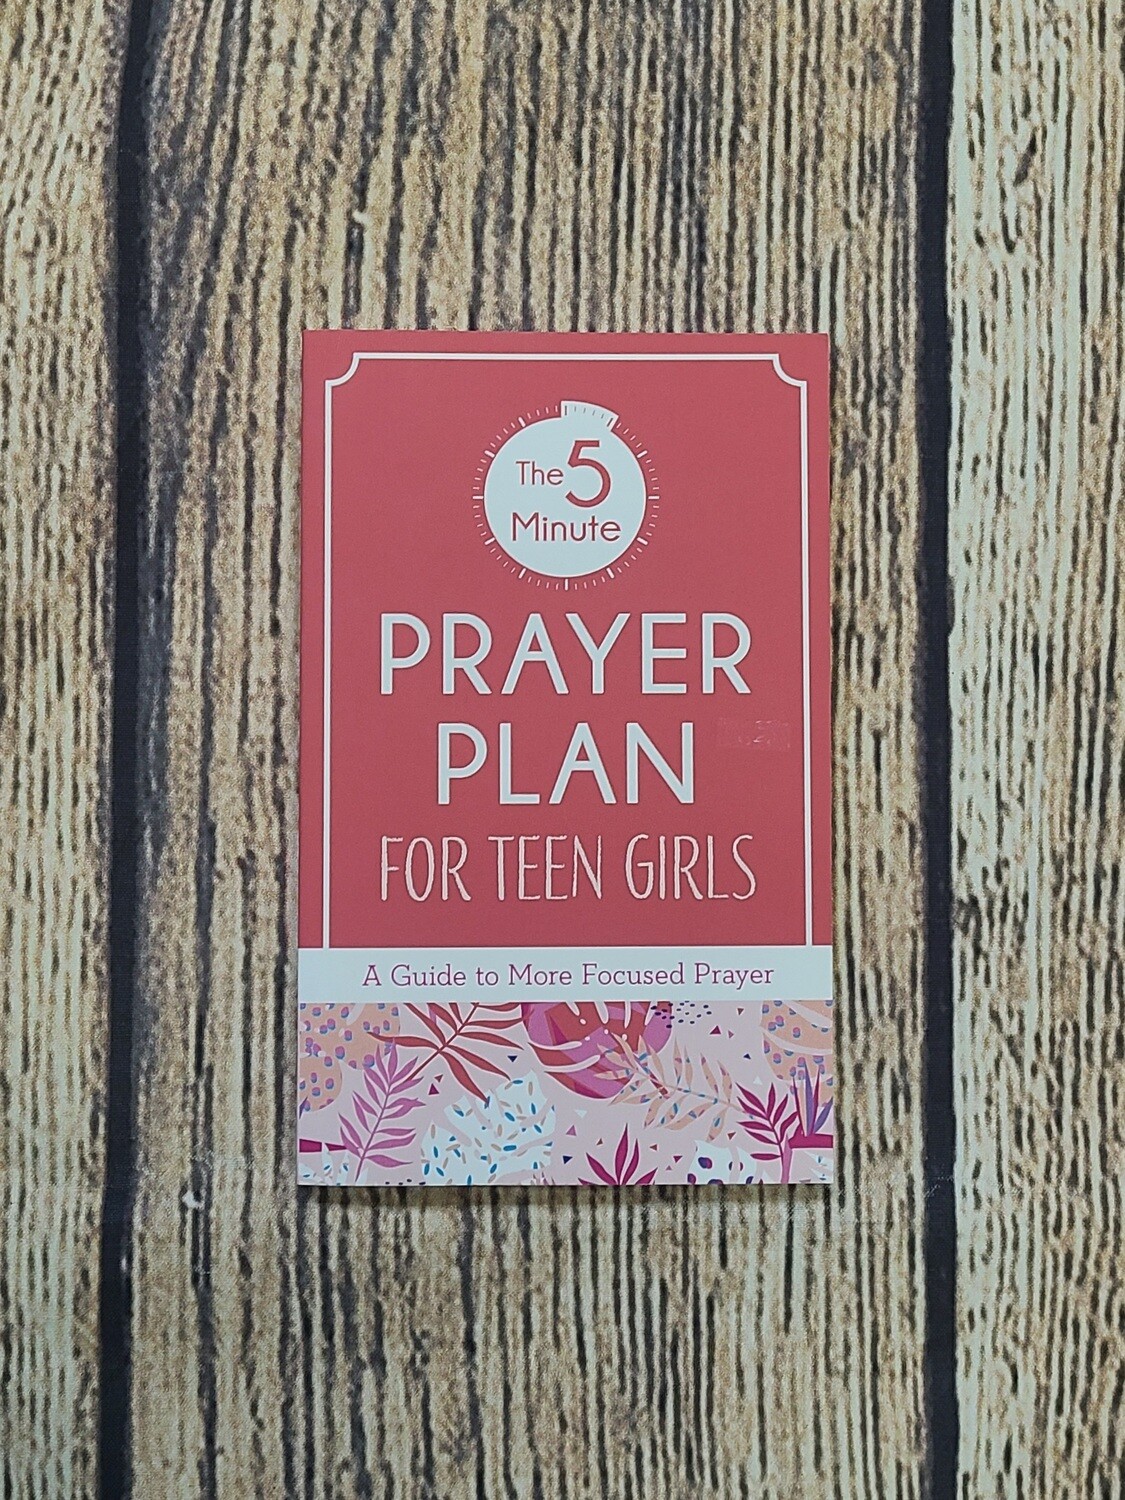 The 5-Minute Prayer Plan for Teen Girls by MariLee Parrish